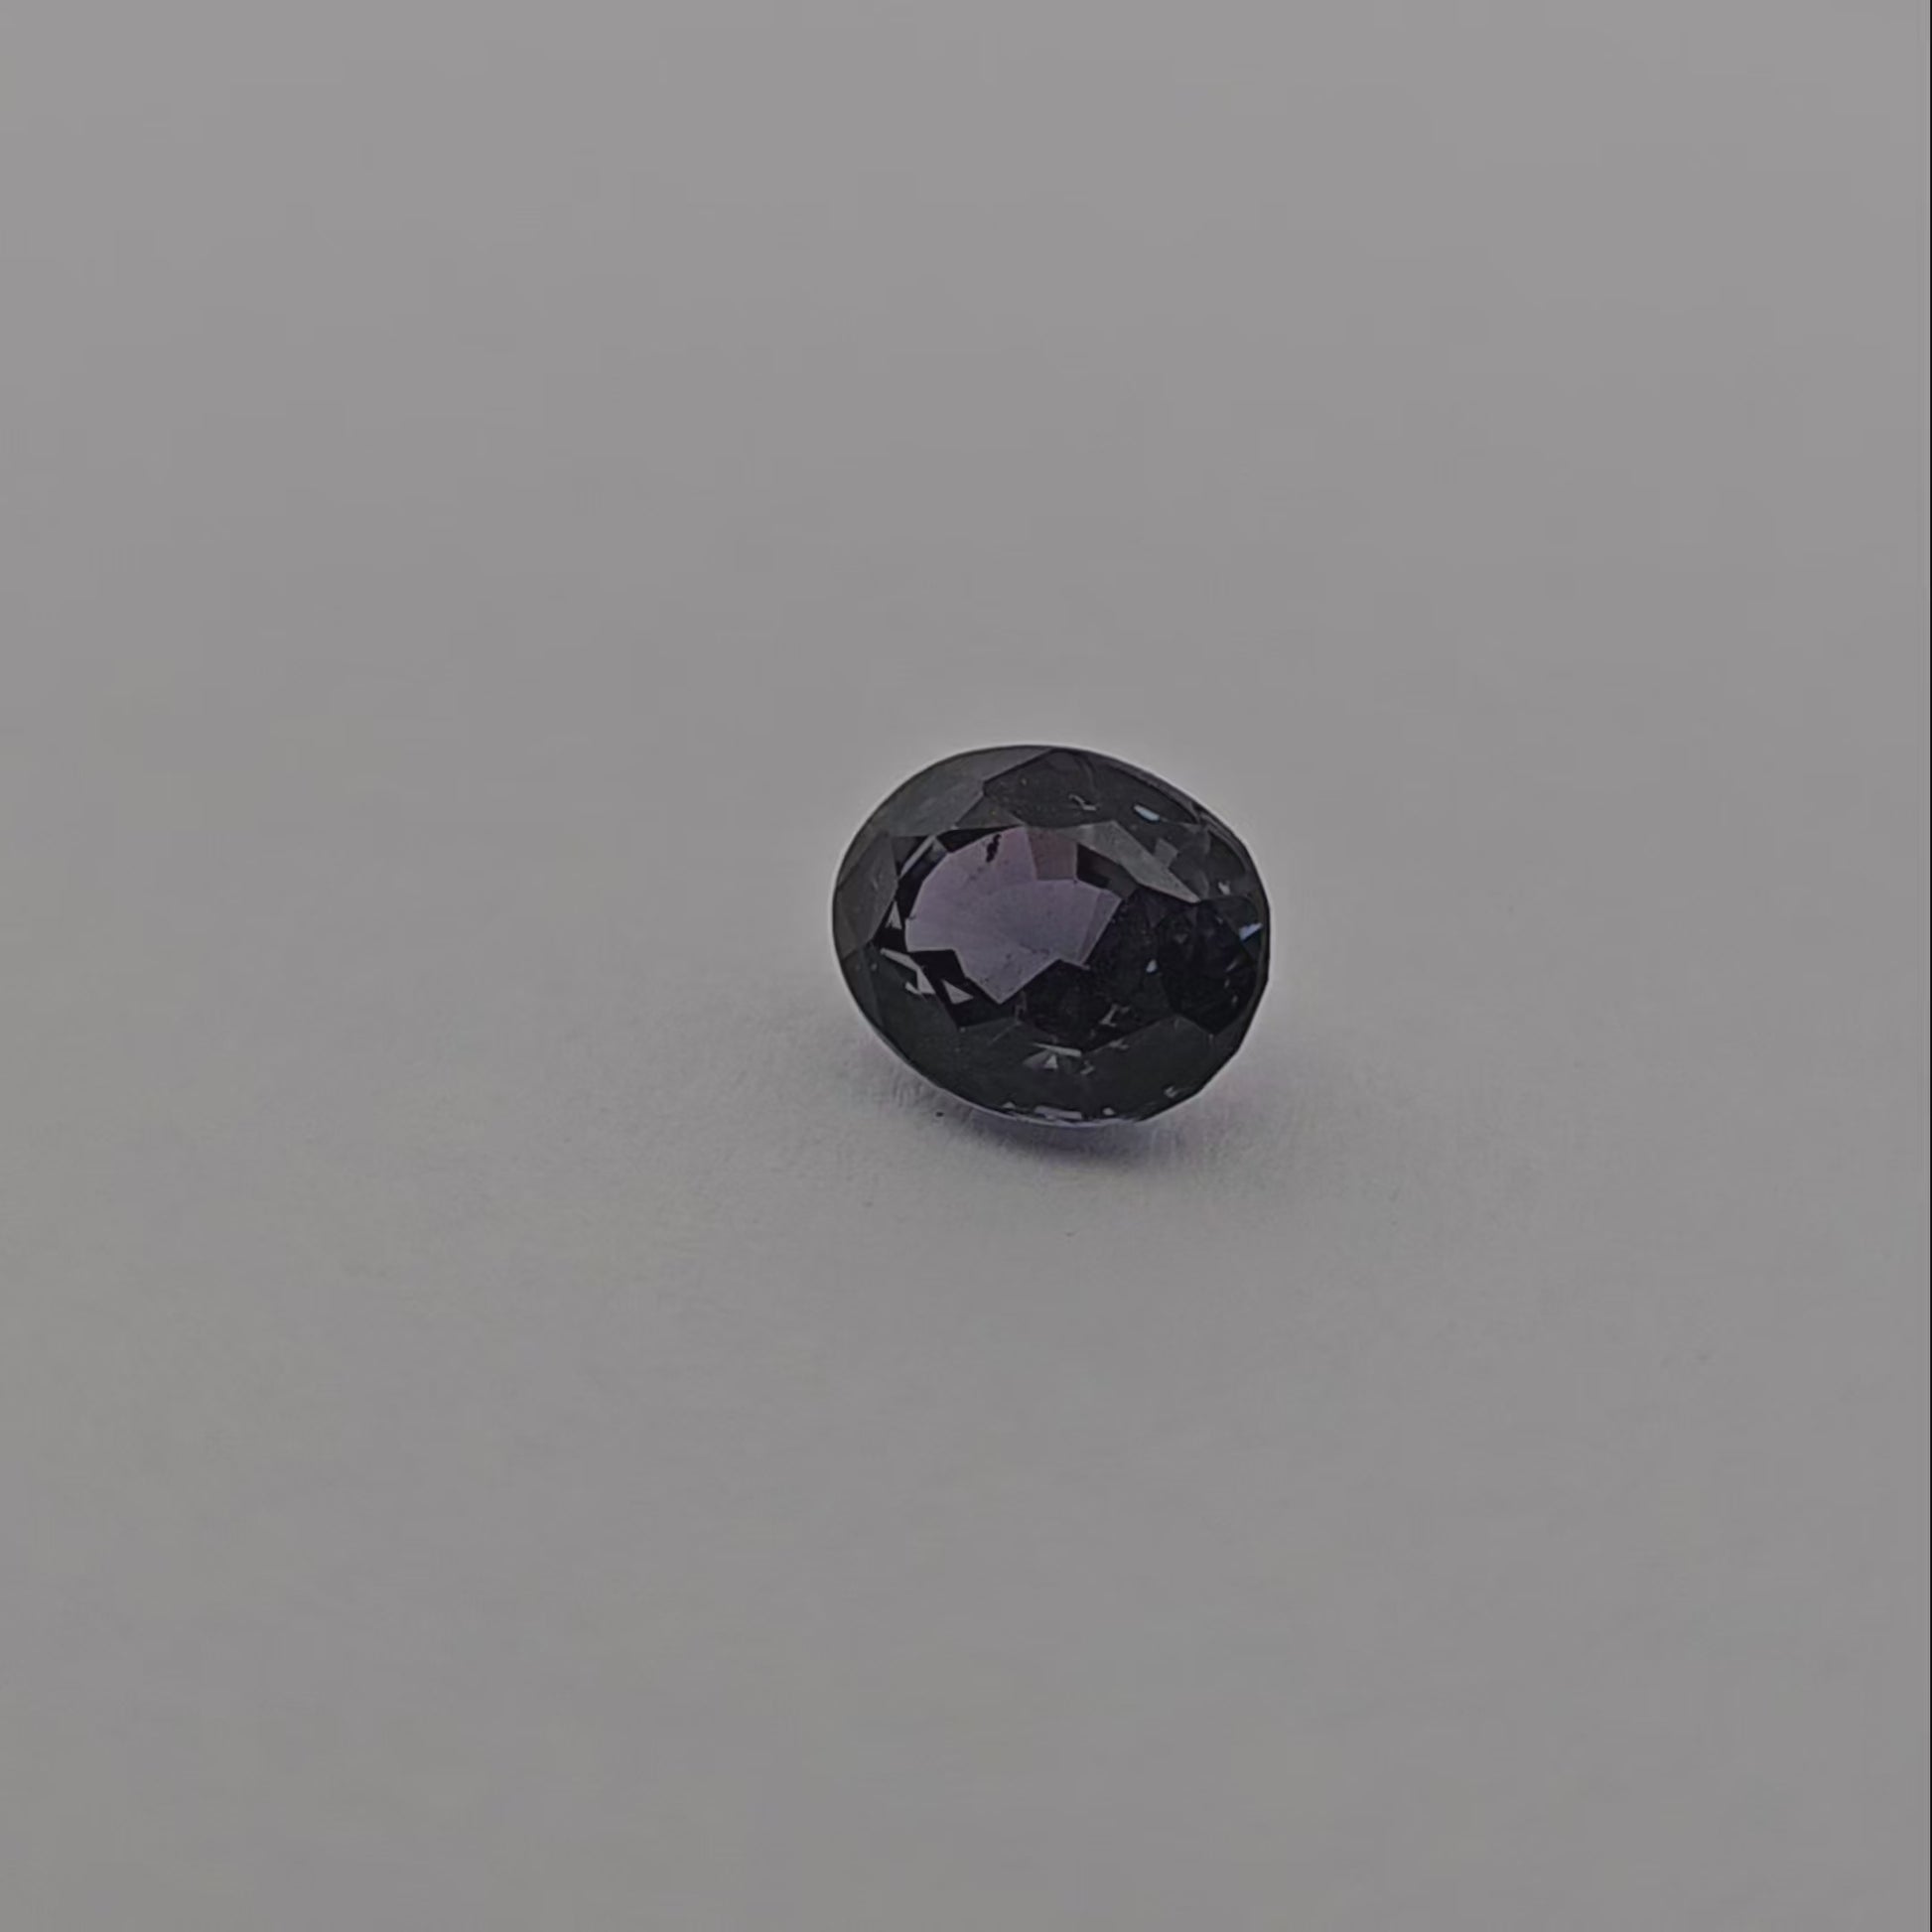 Natural Purple Spinel Stone 1.58 Carats Oval Cut (7.5 x 5.8 mm)